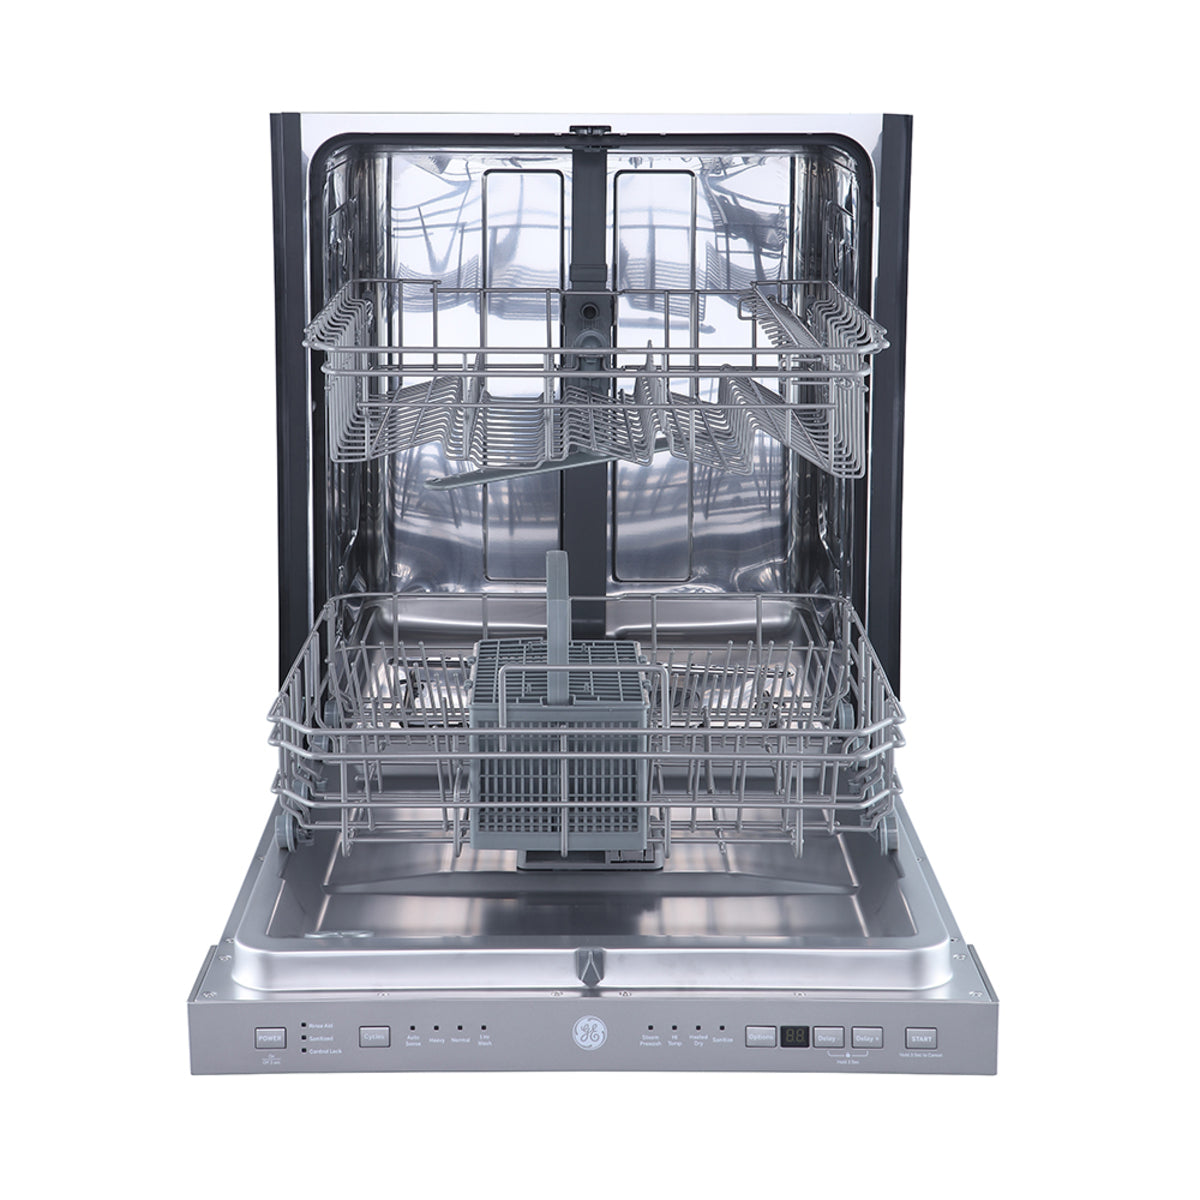 GE Dishwasher 24" Stainless Steel GBP534SSPSS